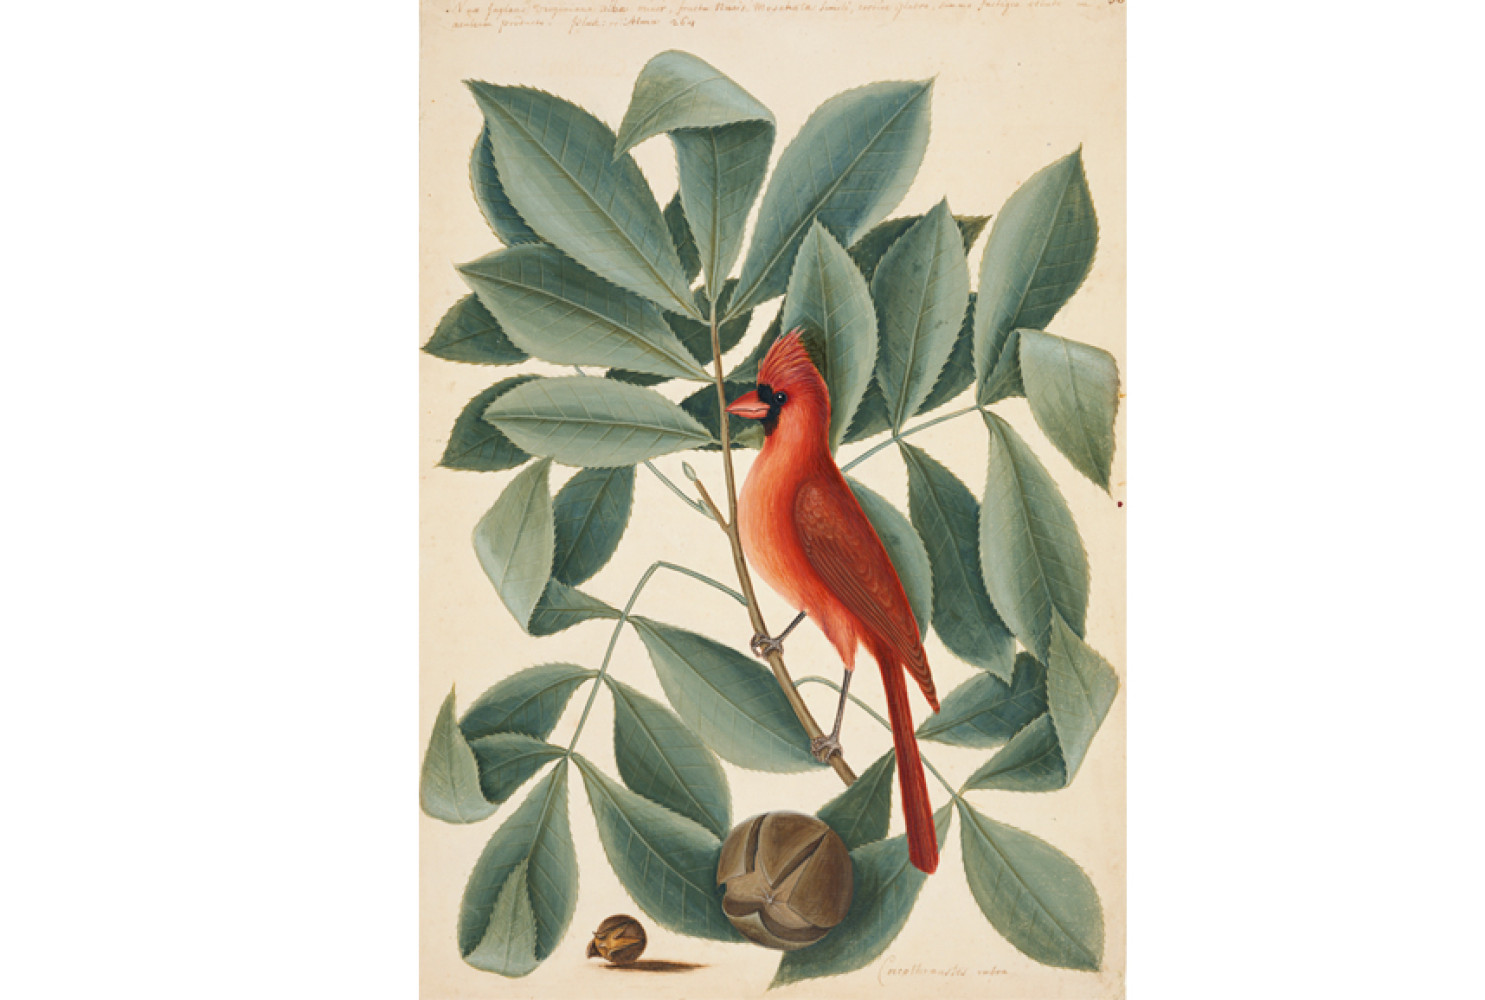 The Red Bird, the Hiccory Tree and the Pignut, ca. 1722-1726, by Mark Catesby (British, 1682-1749); watercolour and bodycolour heightened with gum Arabic; 29 1/2 x 22 1/2 inches; Lent by Her Majesty Queen Elizabeth II
